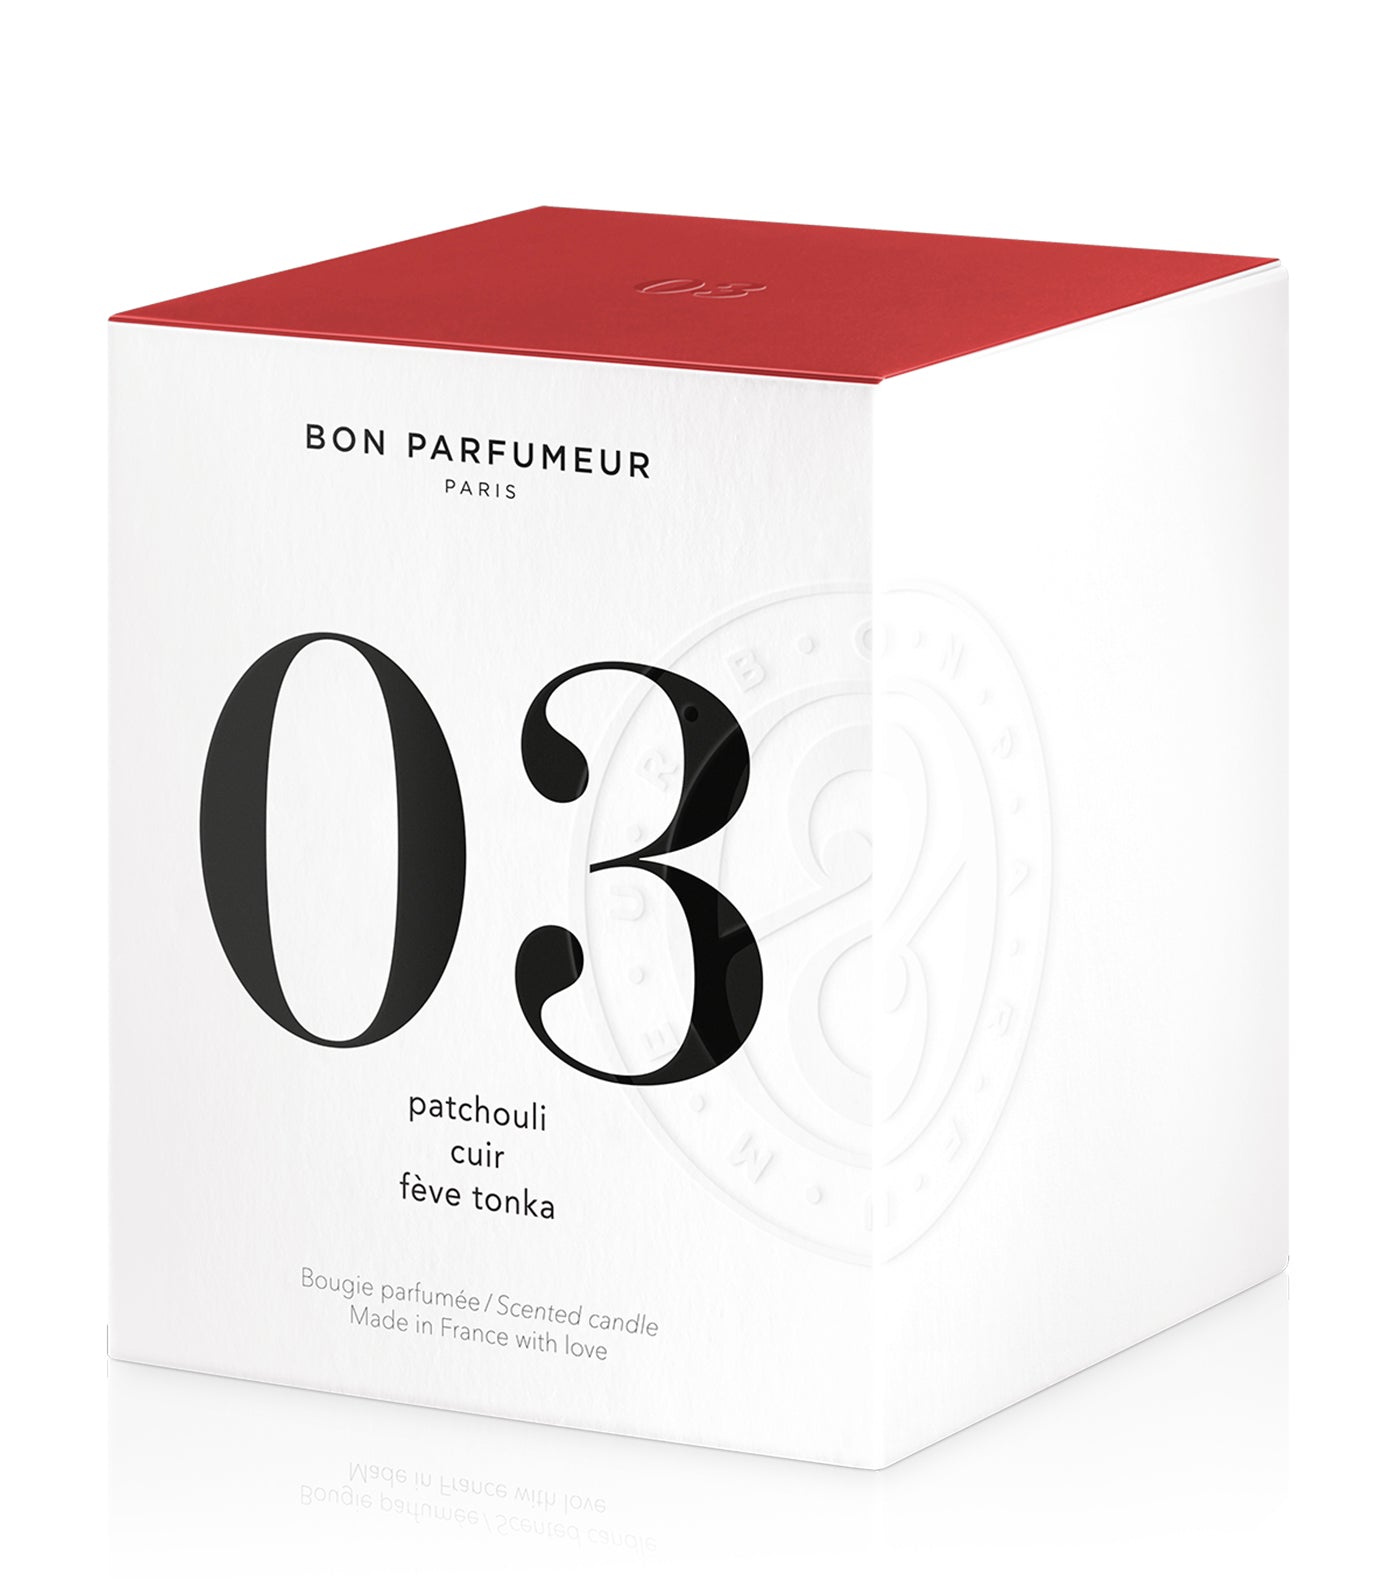 Candle no. 03 : patchouli, leather, tonka bean